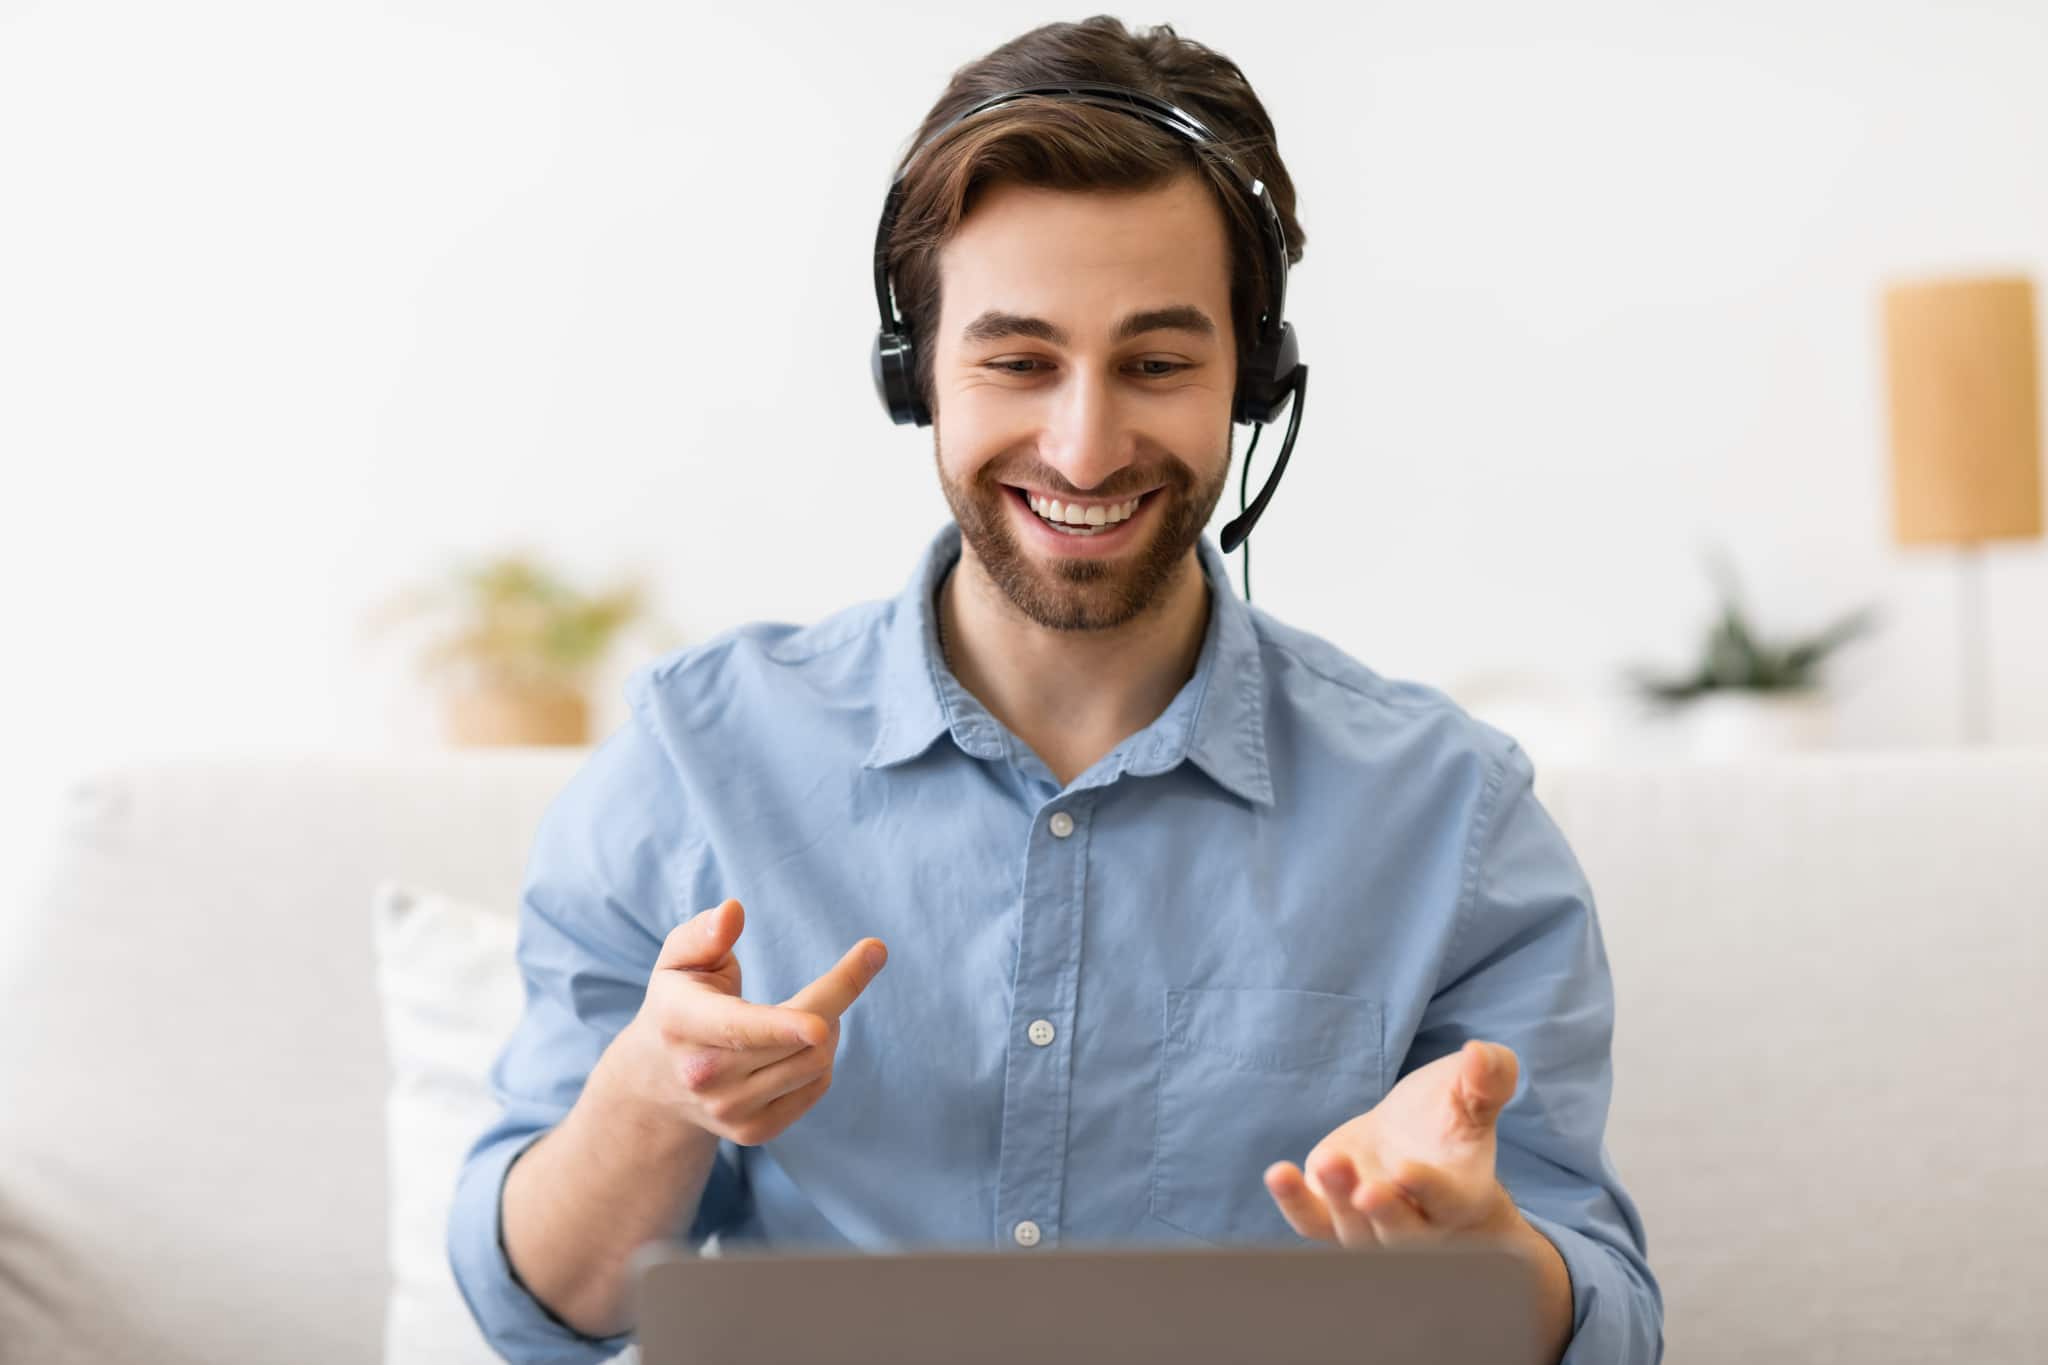 A person wearing headphones, speaking in a video call